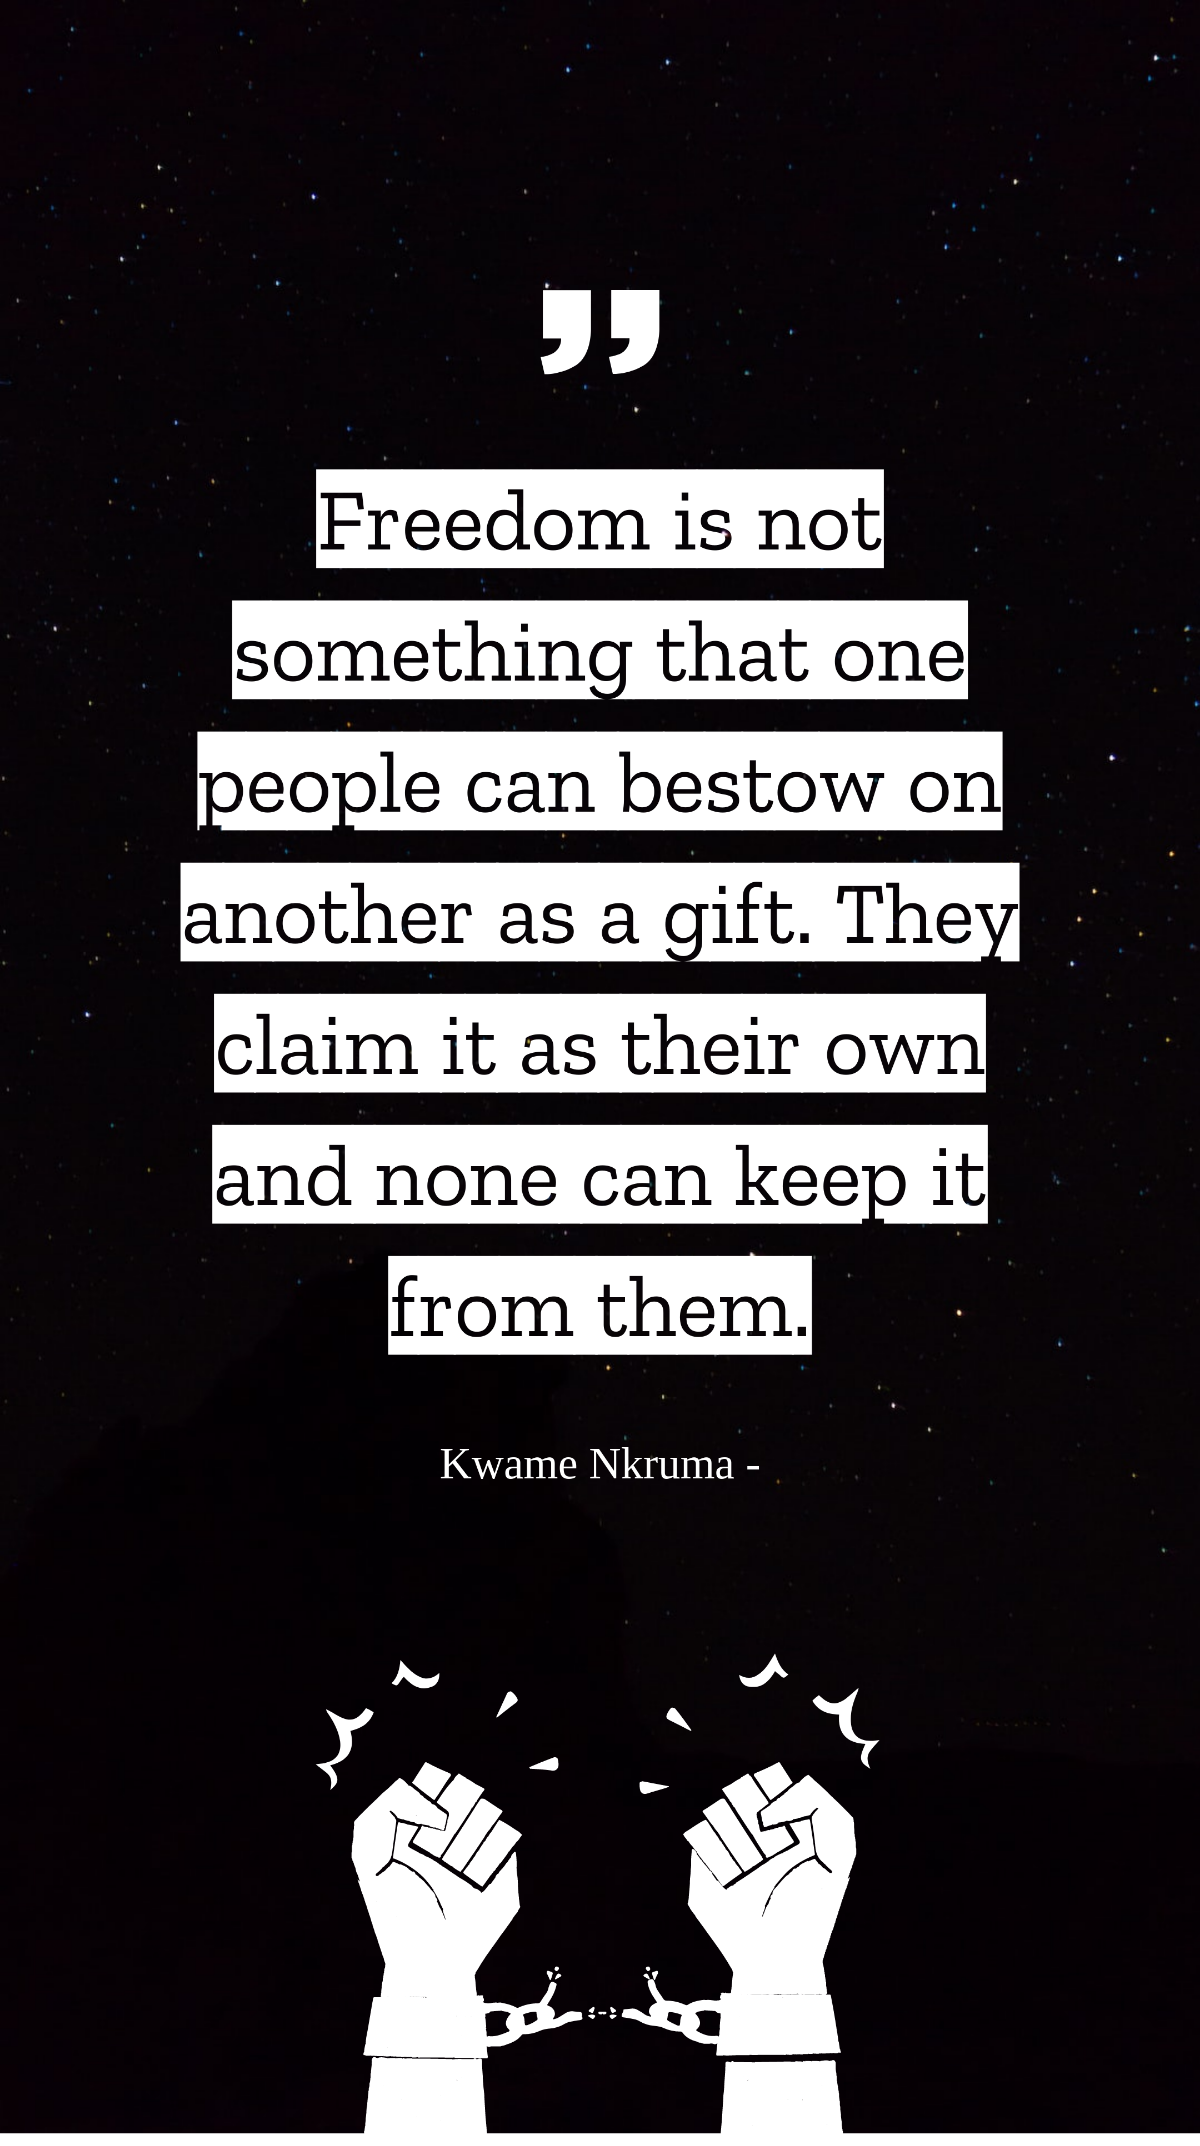 Kwame Nkruma - Freedom is not something that one people can bestow on another as a gift. They claim it as their own and none can keep it from them. Template